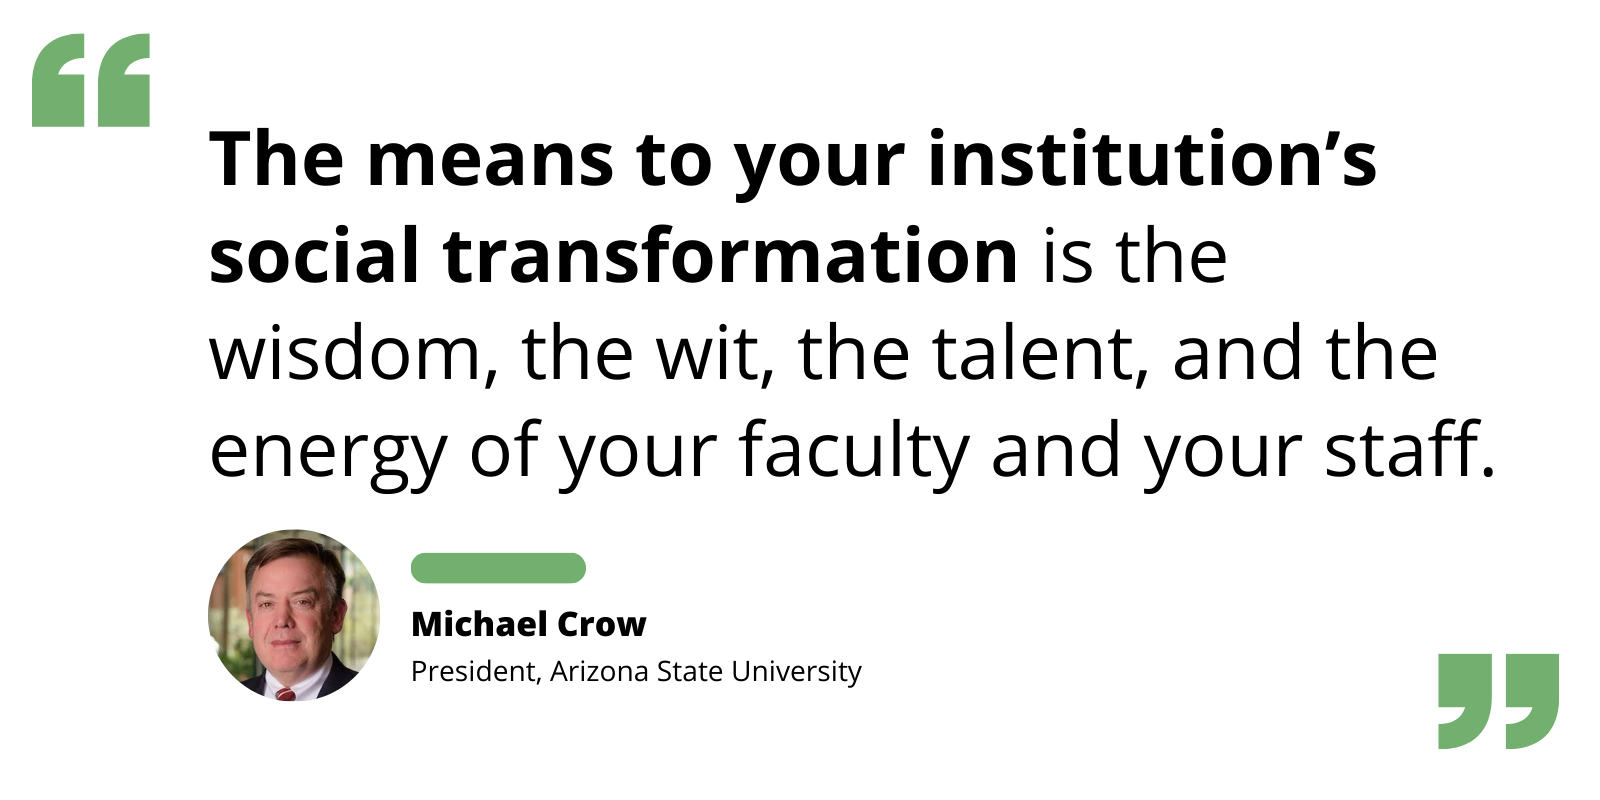 Quote from Michael Crow: “The means to your institution’s social transformation is the wisdom, the wit, the talent, and the energy of your faculty and your staff.”